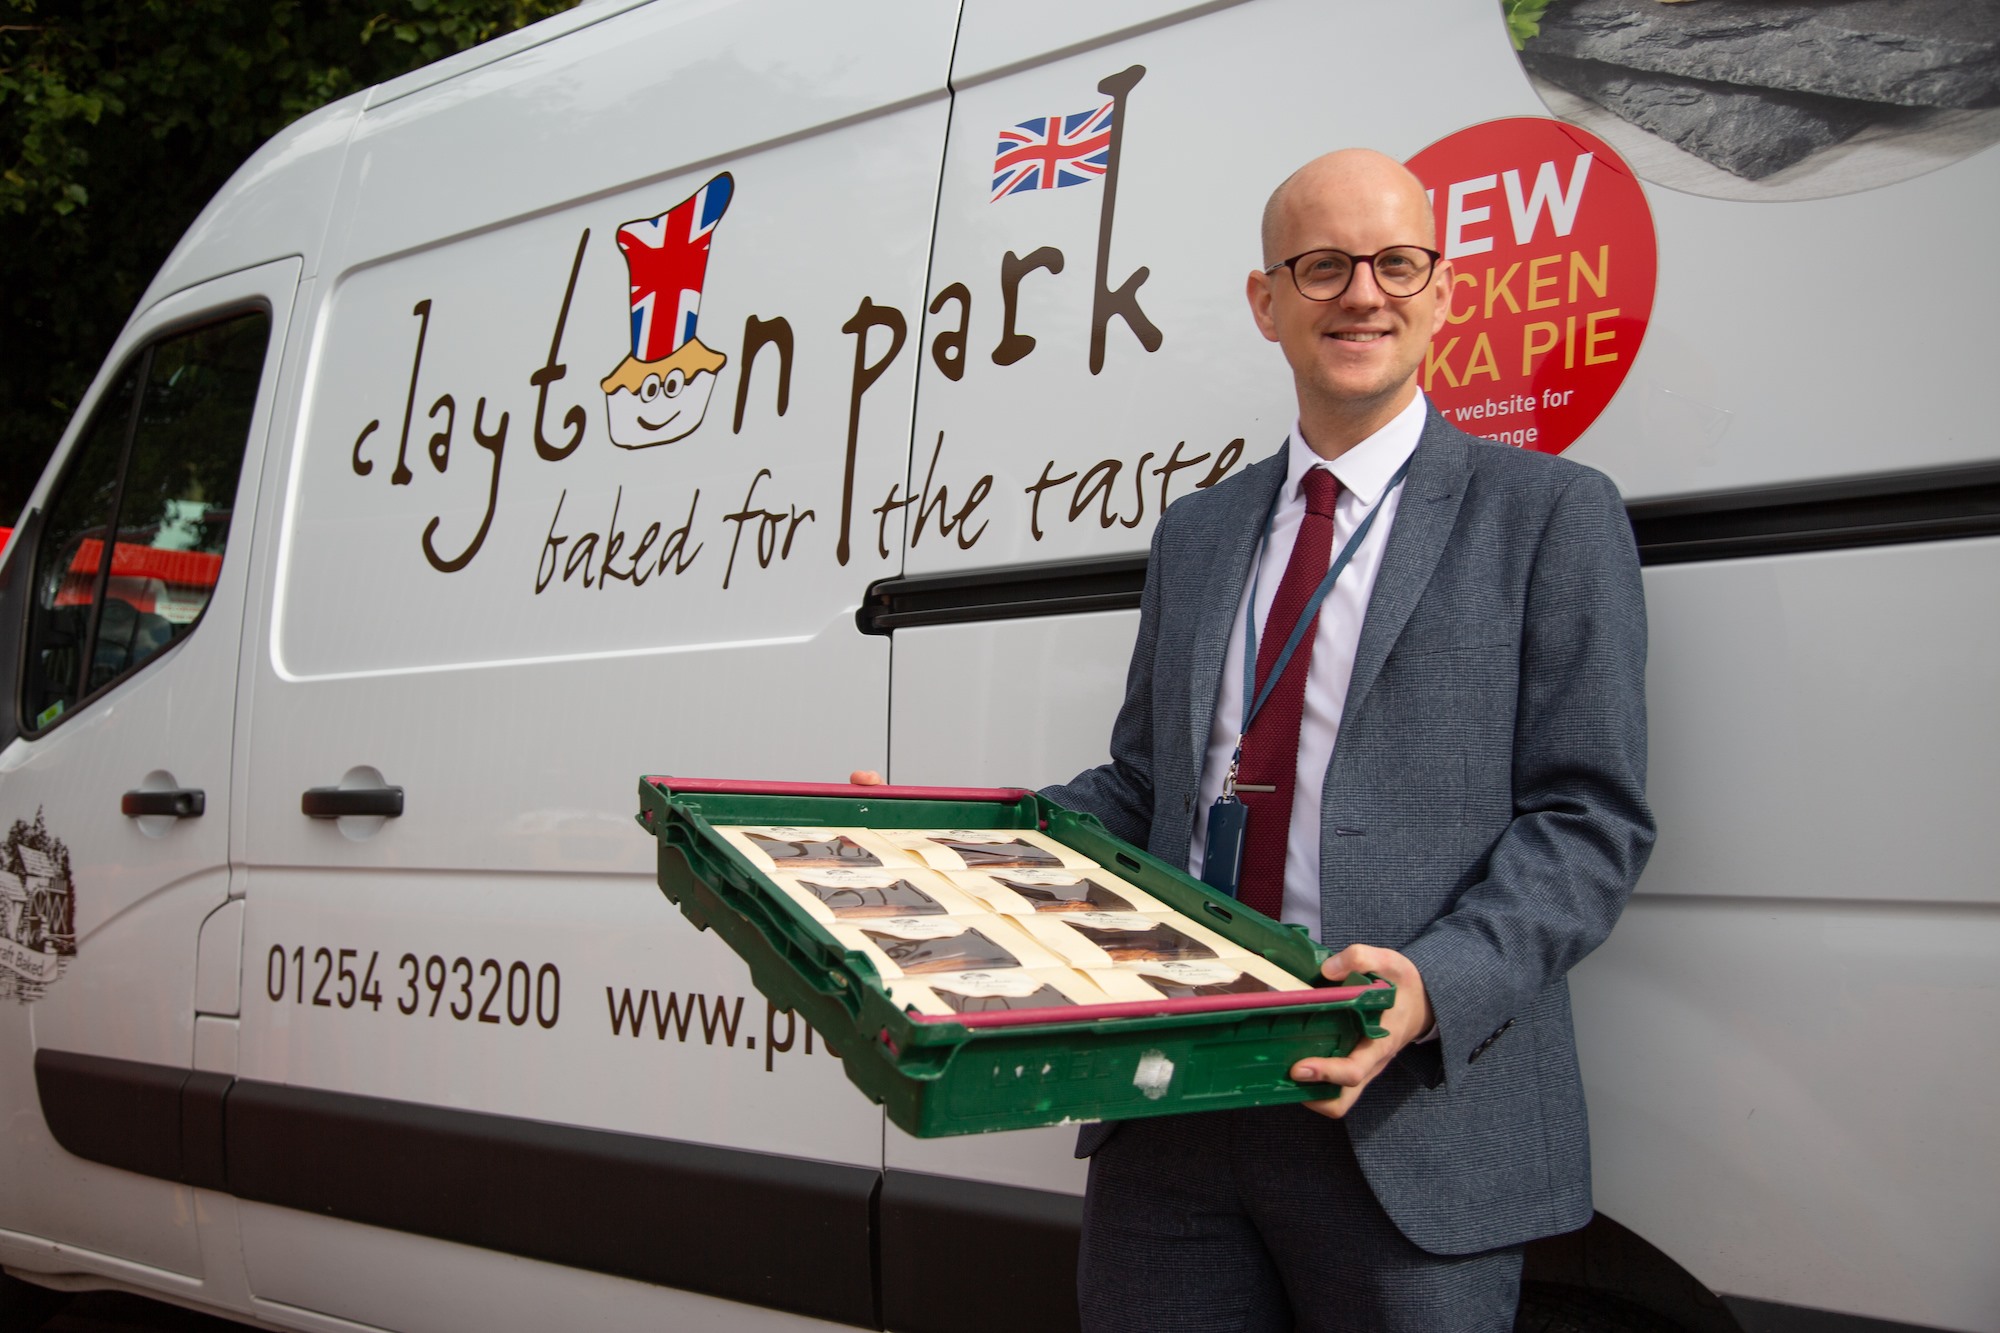 Clayton Park Bakery Fights Food Poverty in East Lancashire